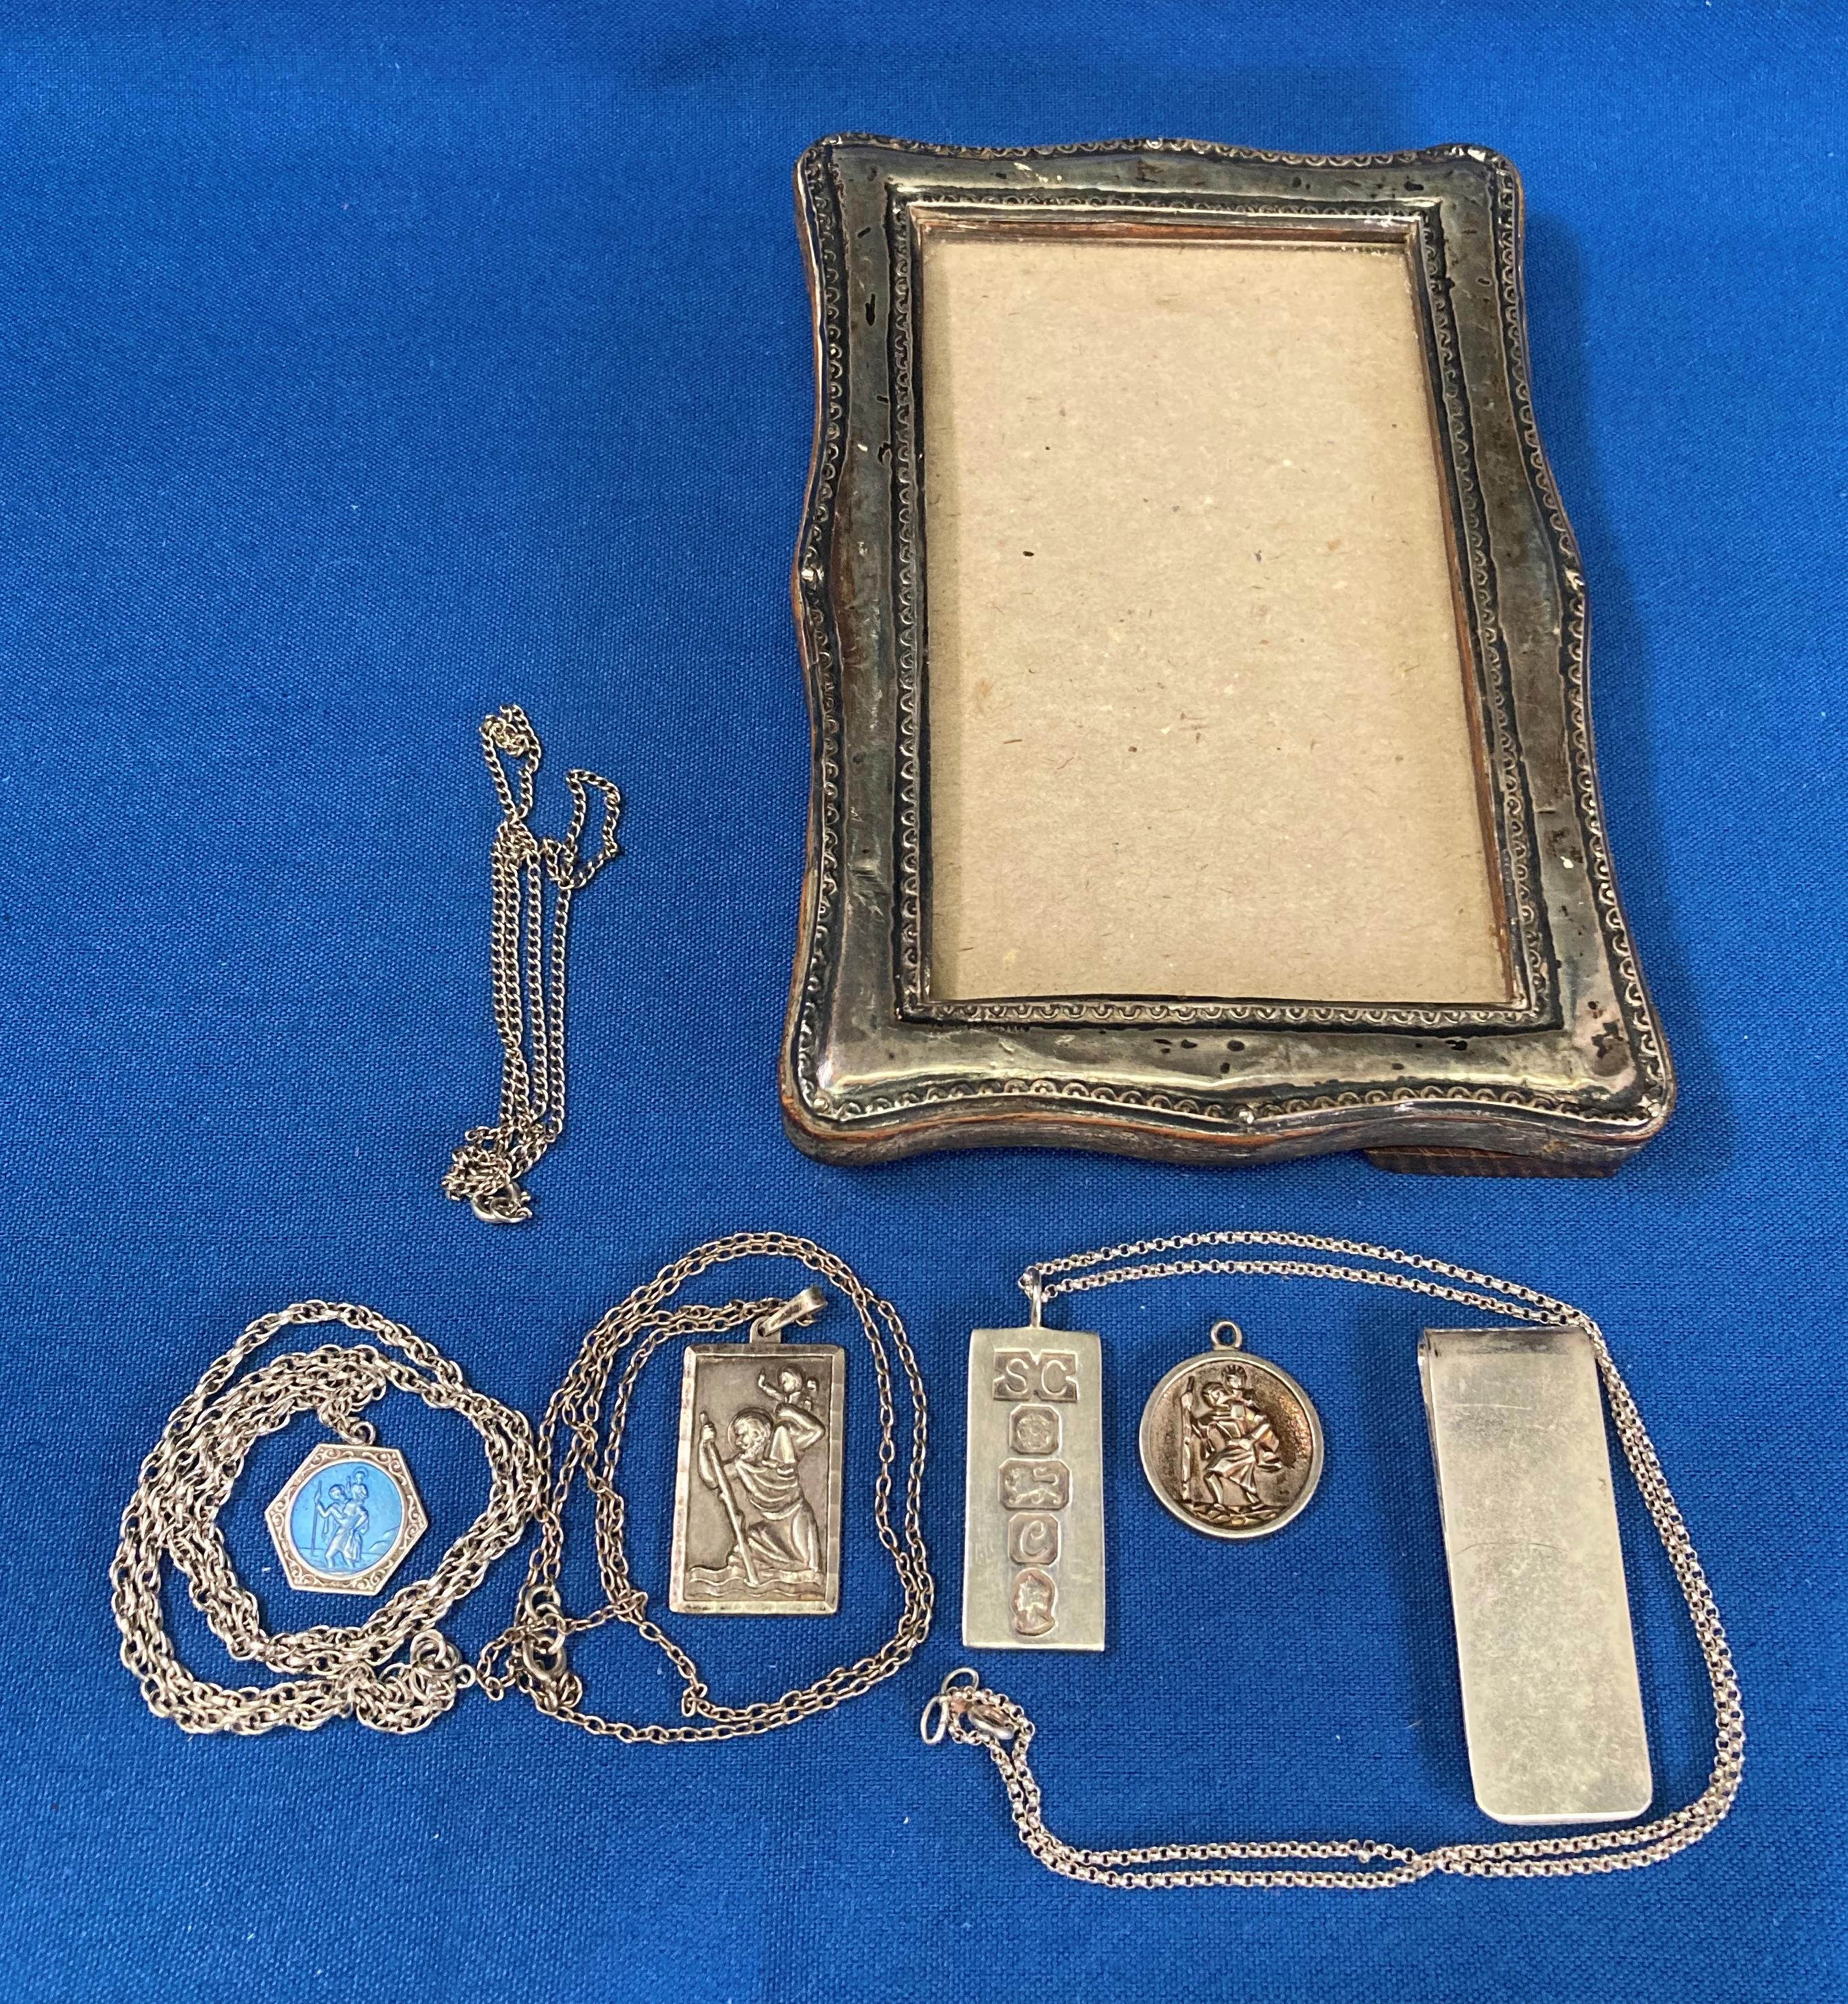 Four assorted silver (hallmark) chains and pendants including silver ingot,